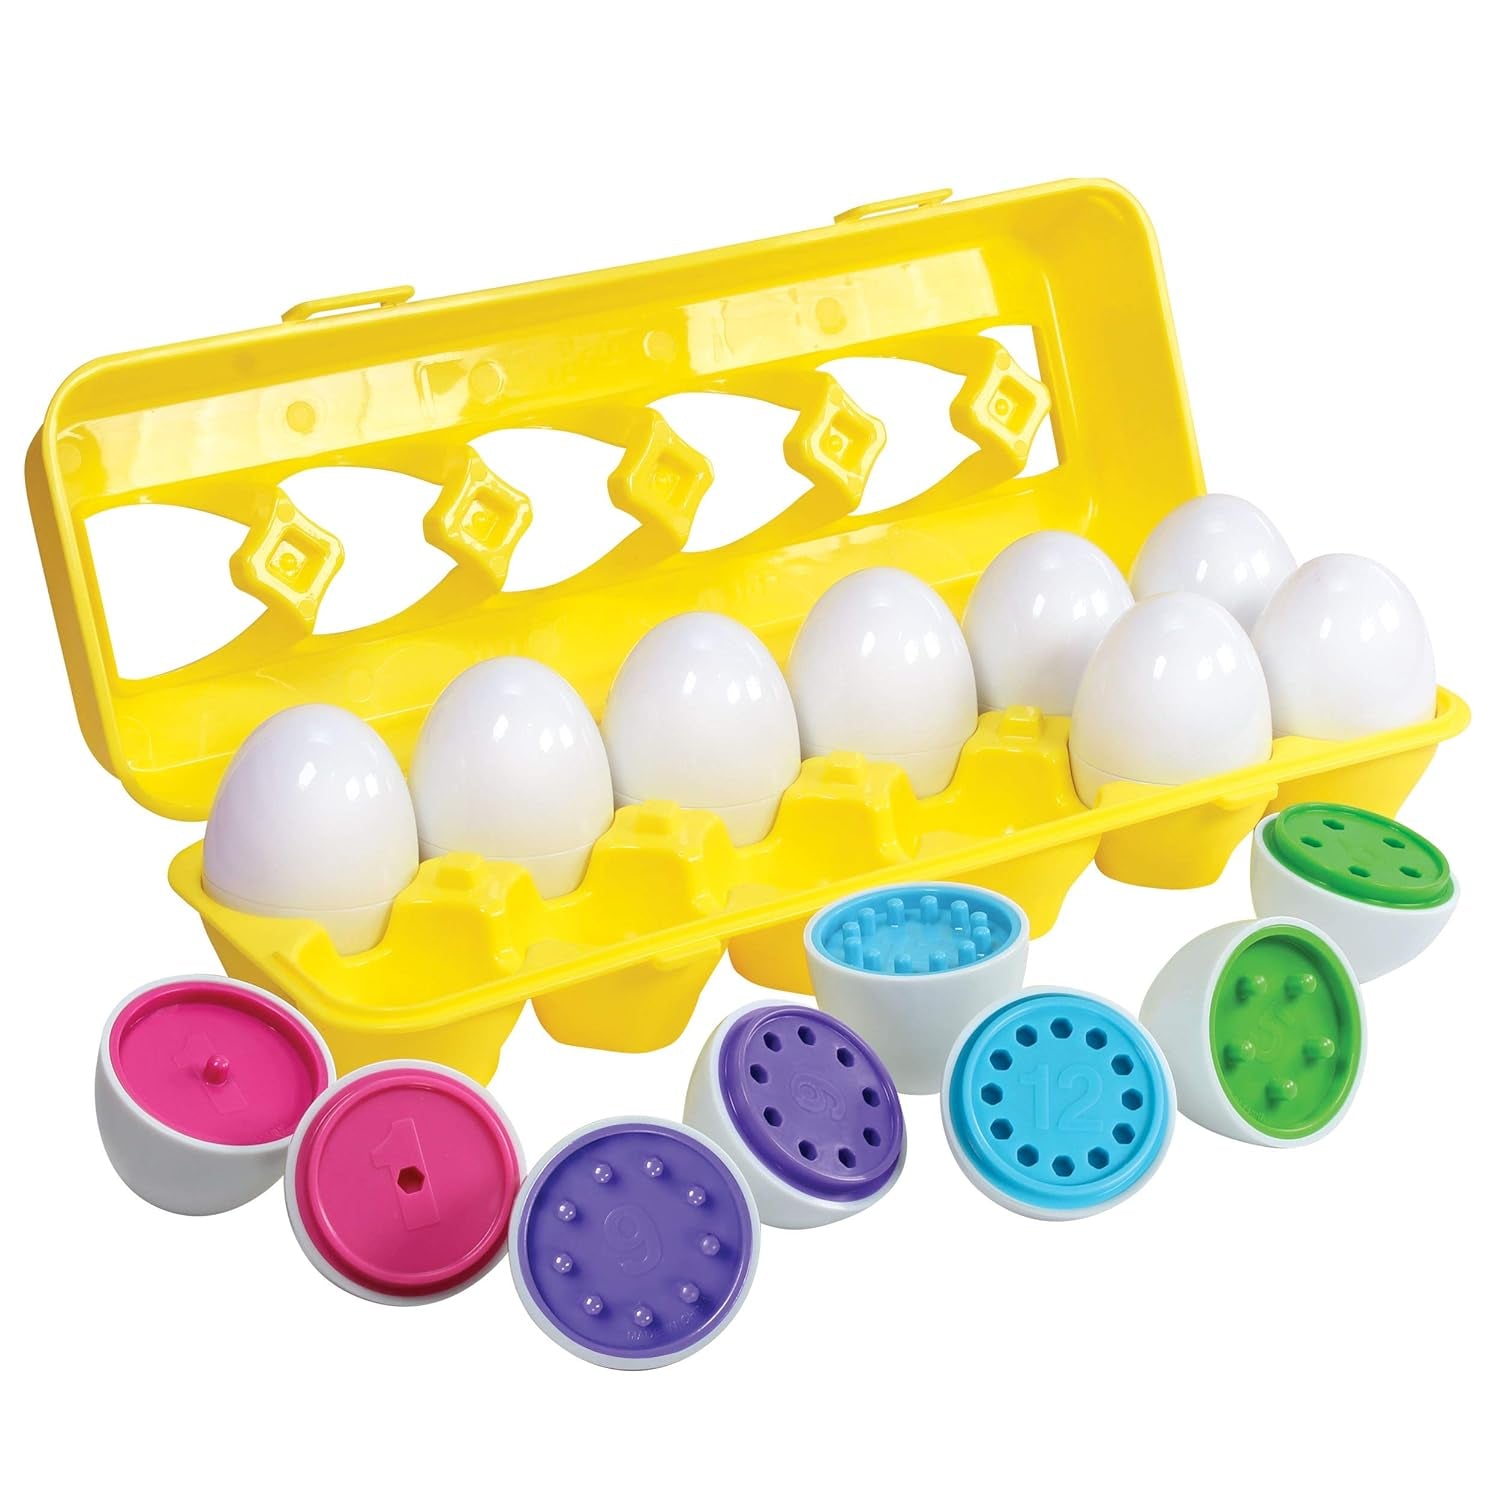 Color Matching Egg Toy Set - 12 Play Eggs Toddler Toys - Educational Color and Number Recognition Skills - Kids Toy Eggs That Crack Open - Learning Egg Game Puzzle for Toddlers, Boys, Girls